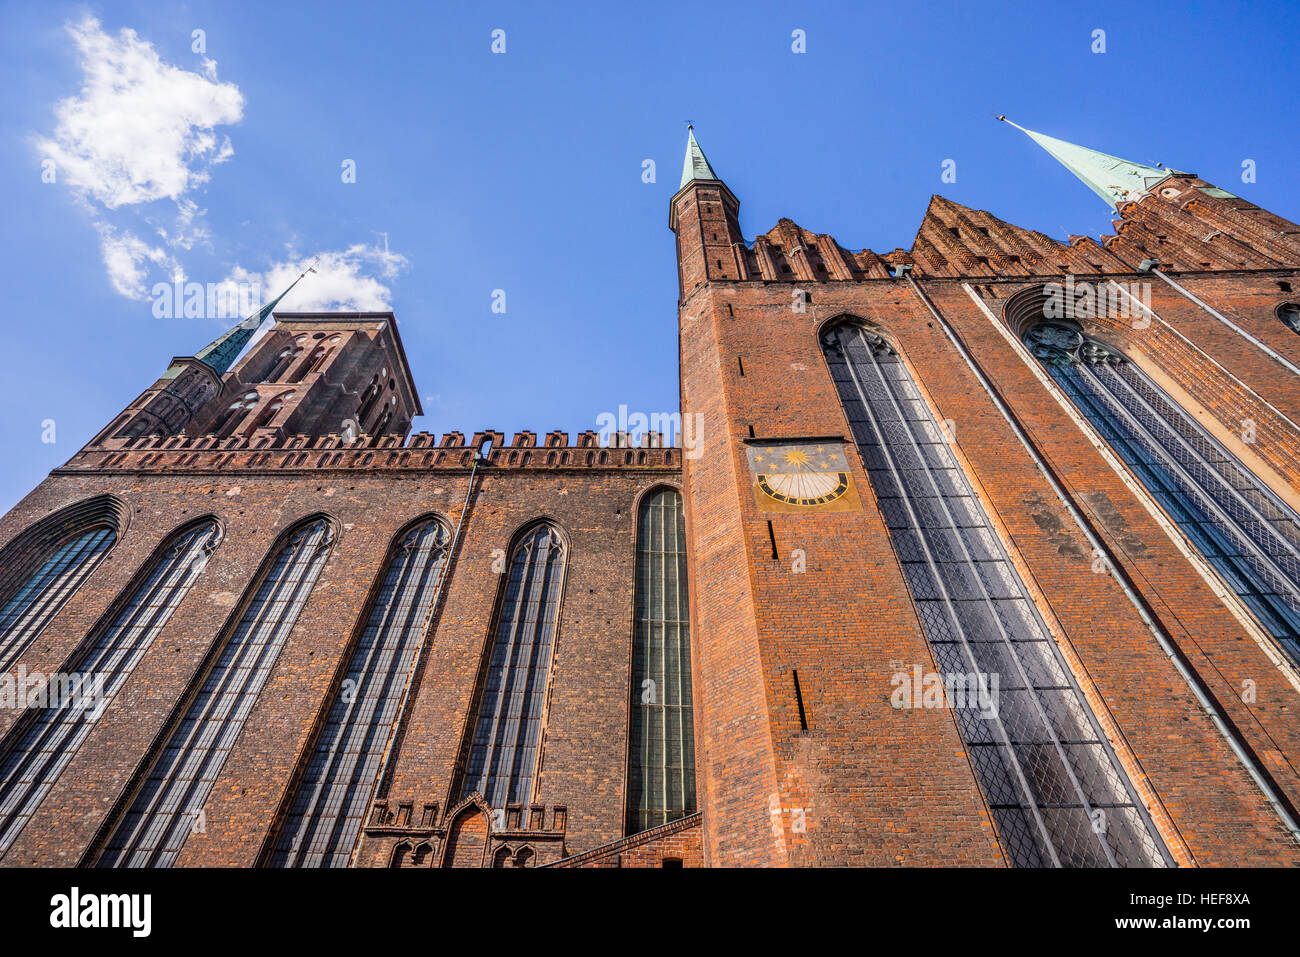 Poland, Pomerania, Gdansk (Danzig), Basilica of the Assumption of the Blessed Virgin Mary (St. Mary's Church), Damm Portal with sundial Stock Photo